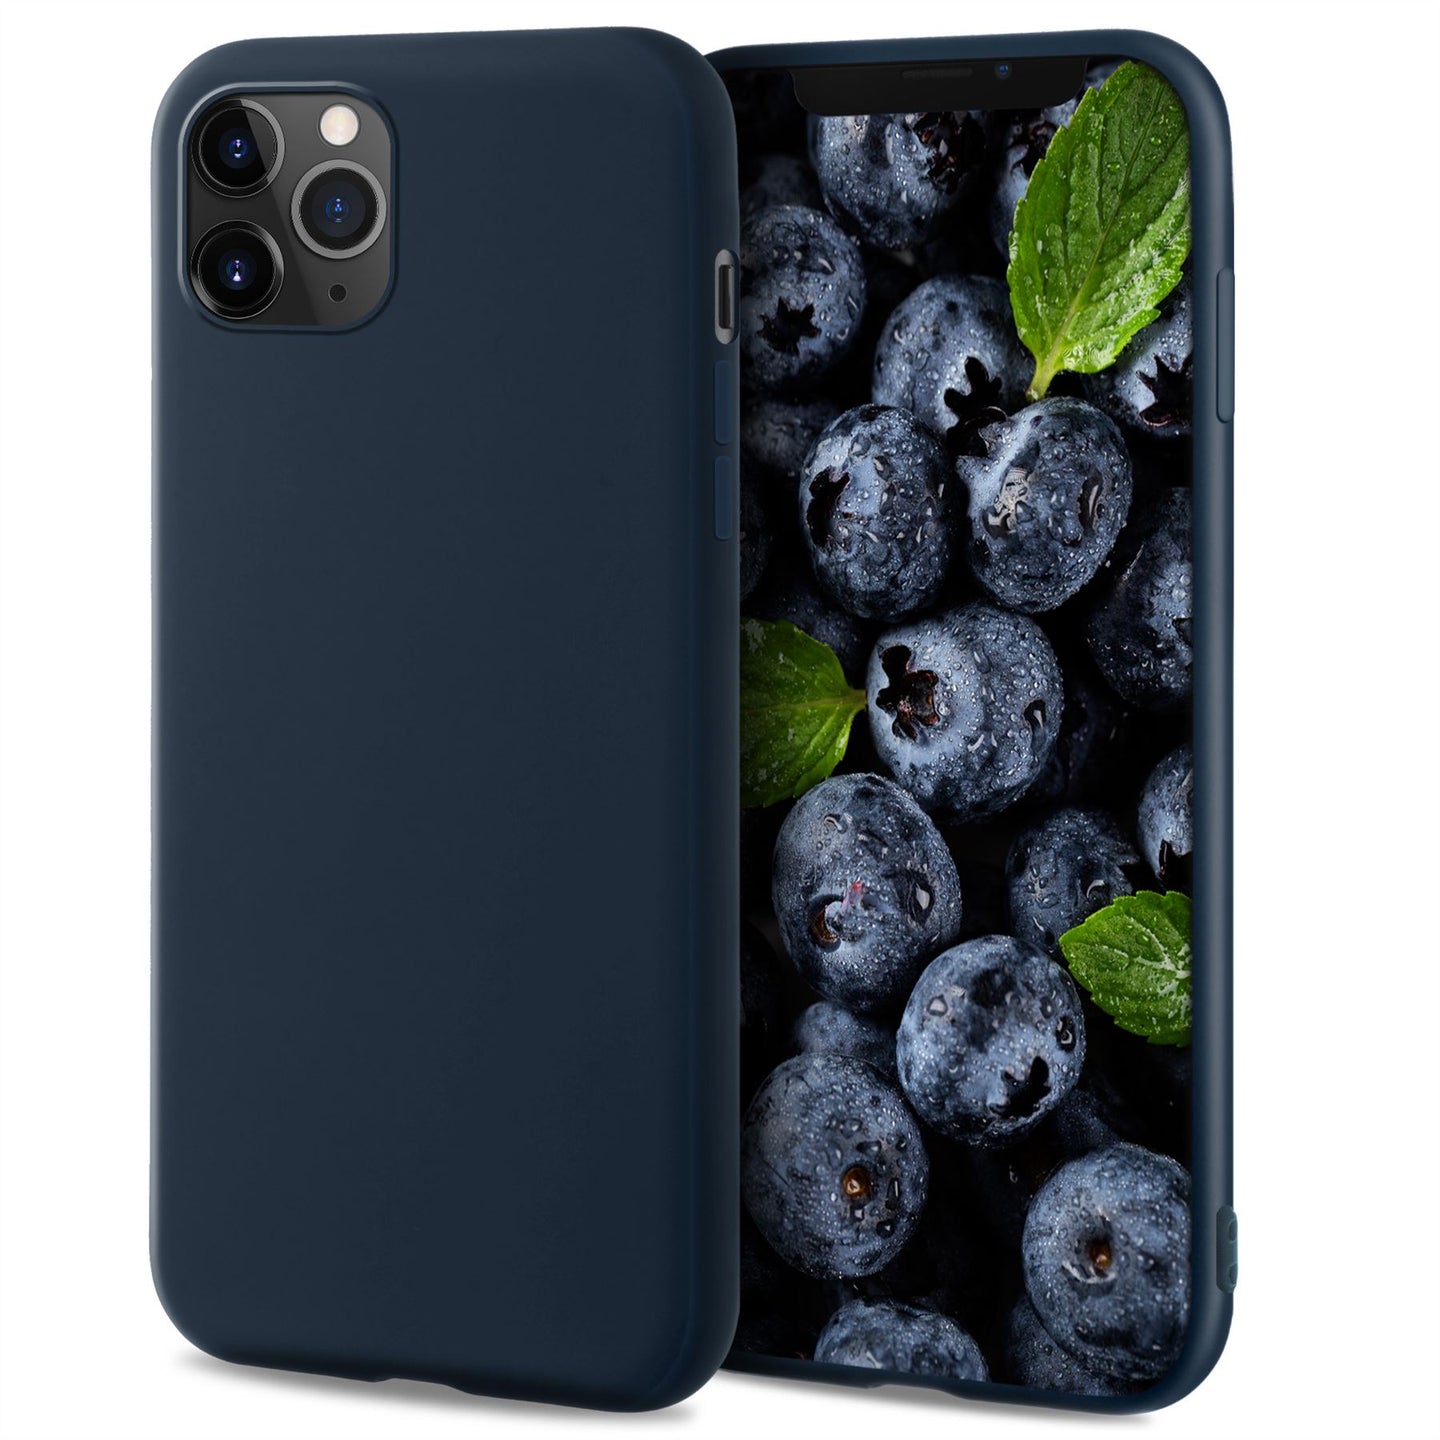 Moozy Lifestyle. Designed for iPhone 12 Pro Max Case, Midnight Blue - Liquid Silicone Cover with Matte Finish and Soft Microfiber Lining